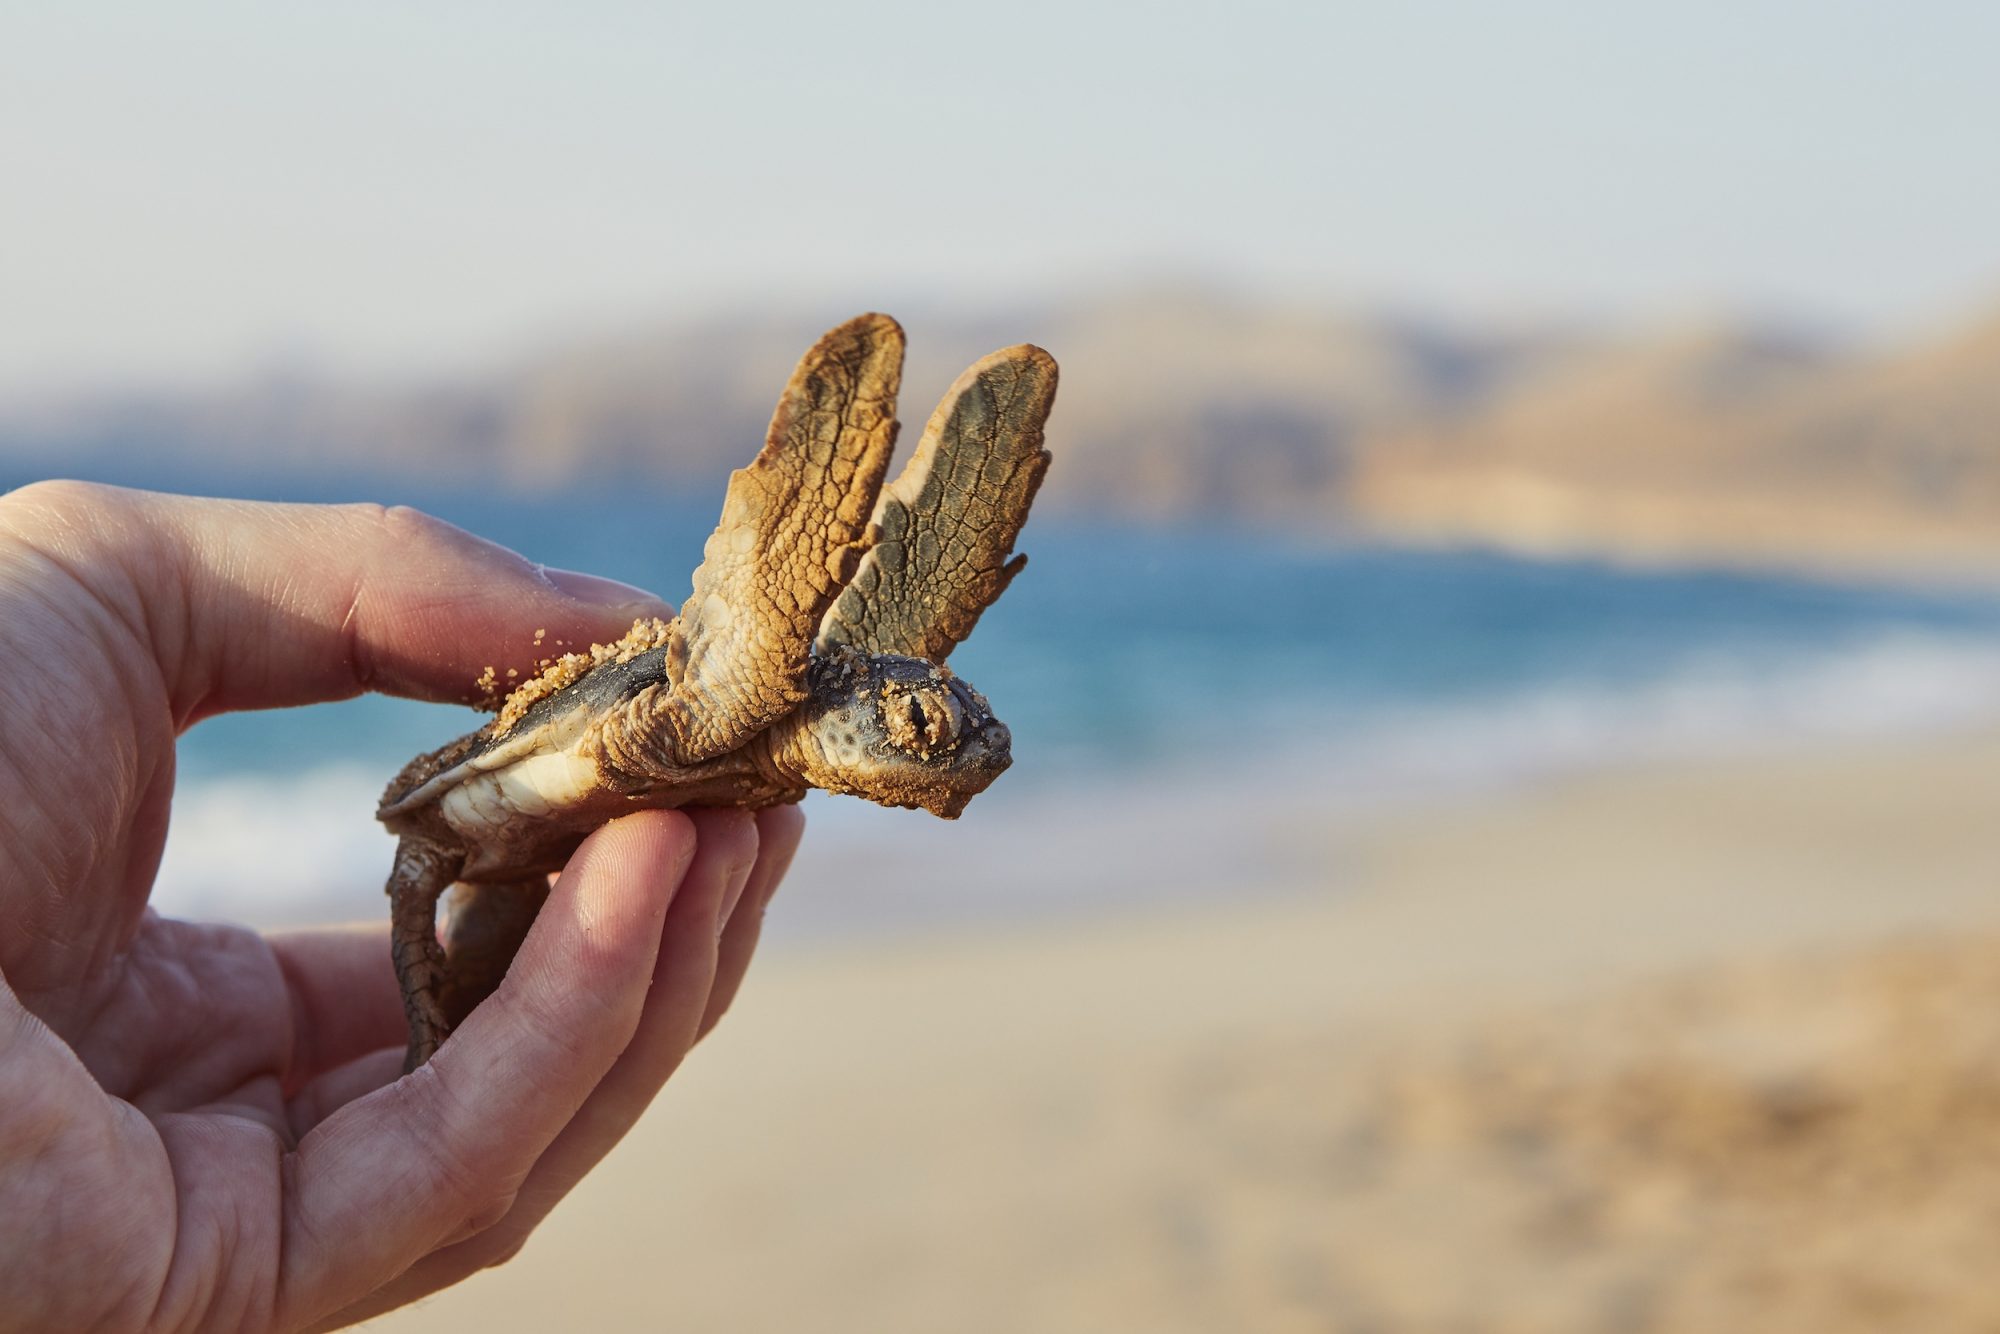 300 baby turtles rescued in cooperation with citizens